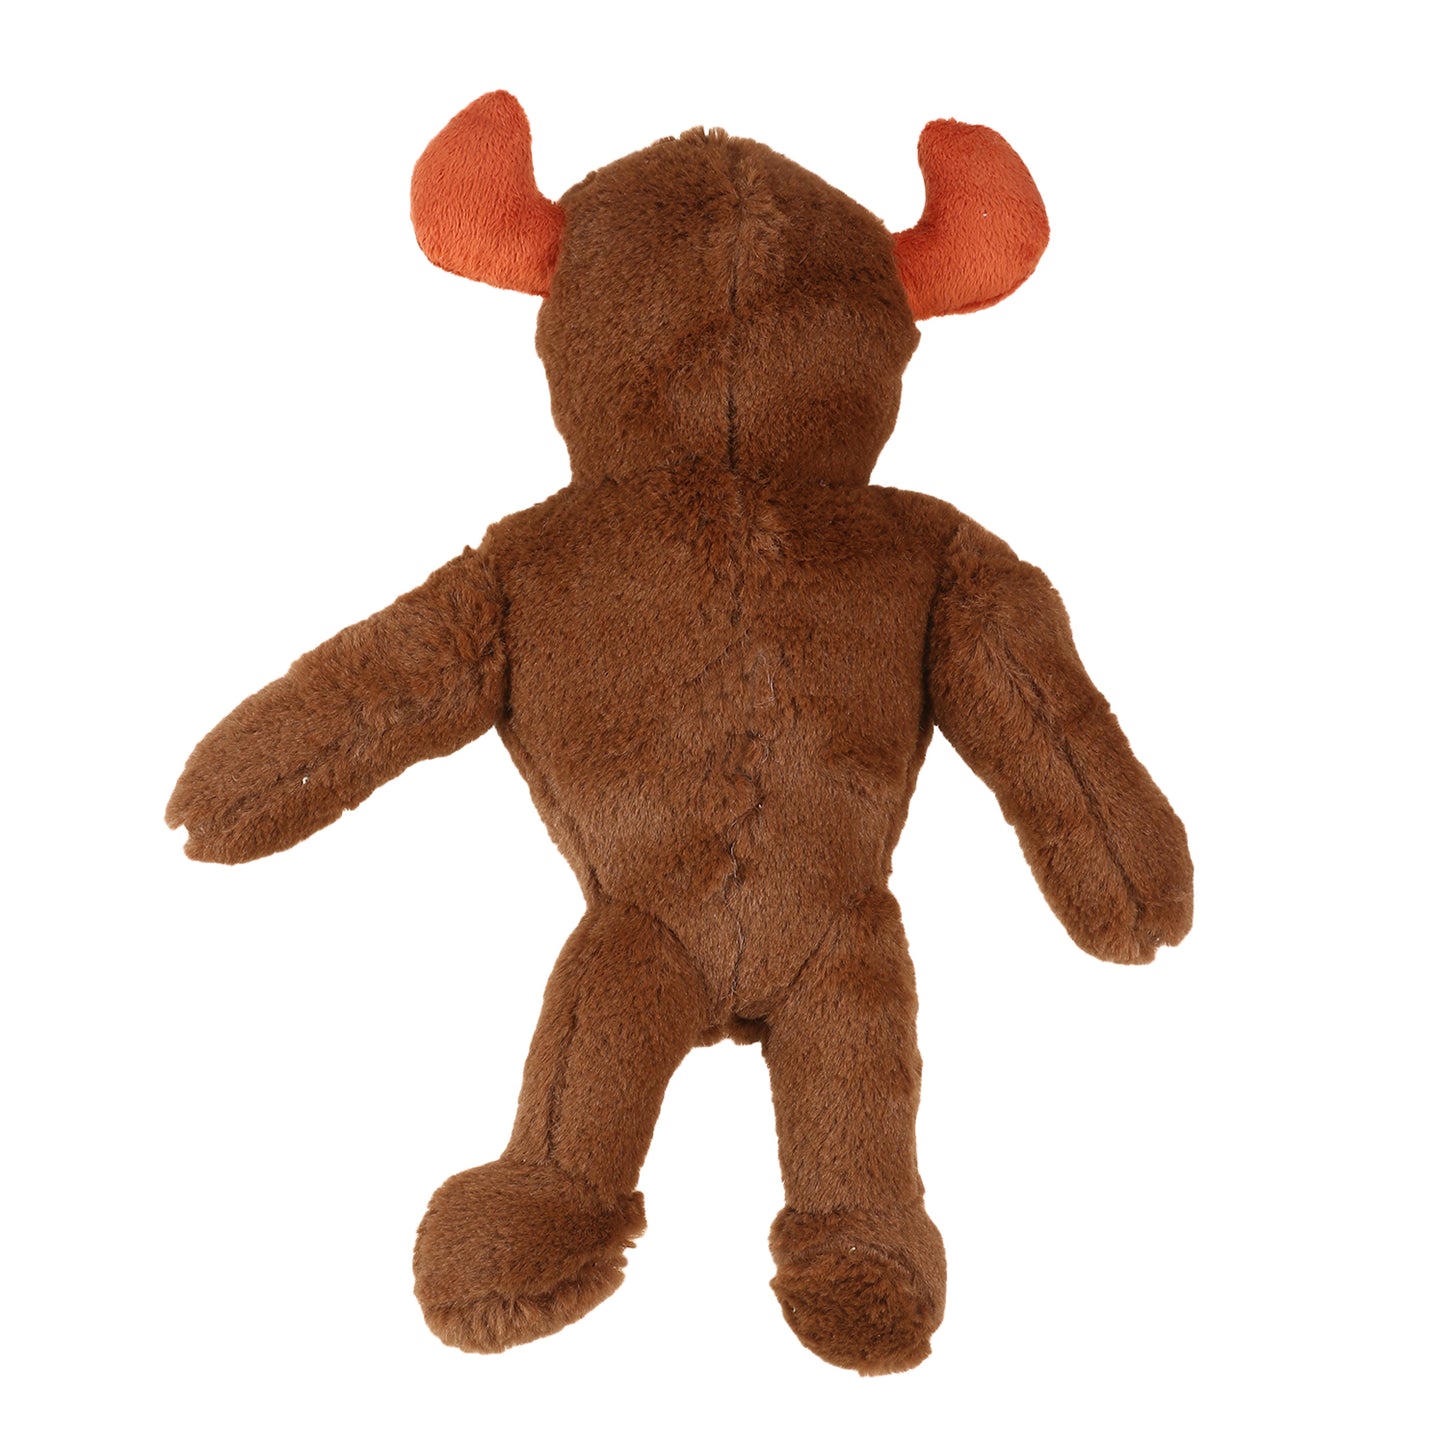 BASIL Big Bull Plush with Squeaky TPR Adult Dog Chew Toy